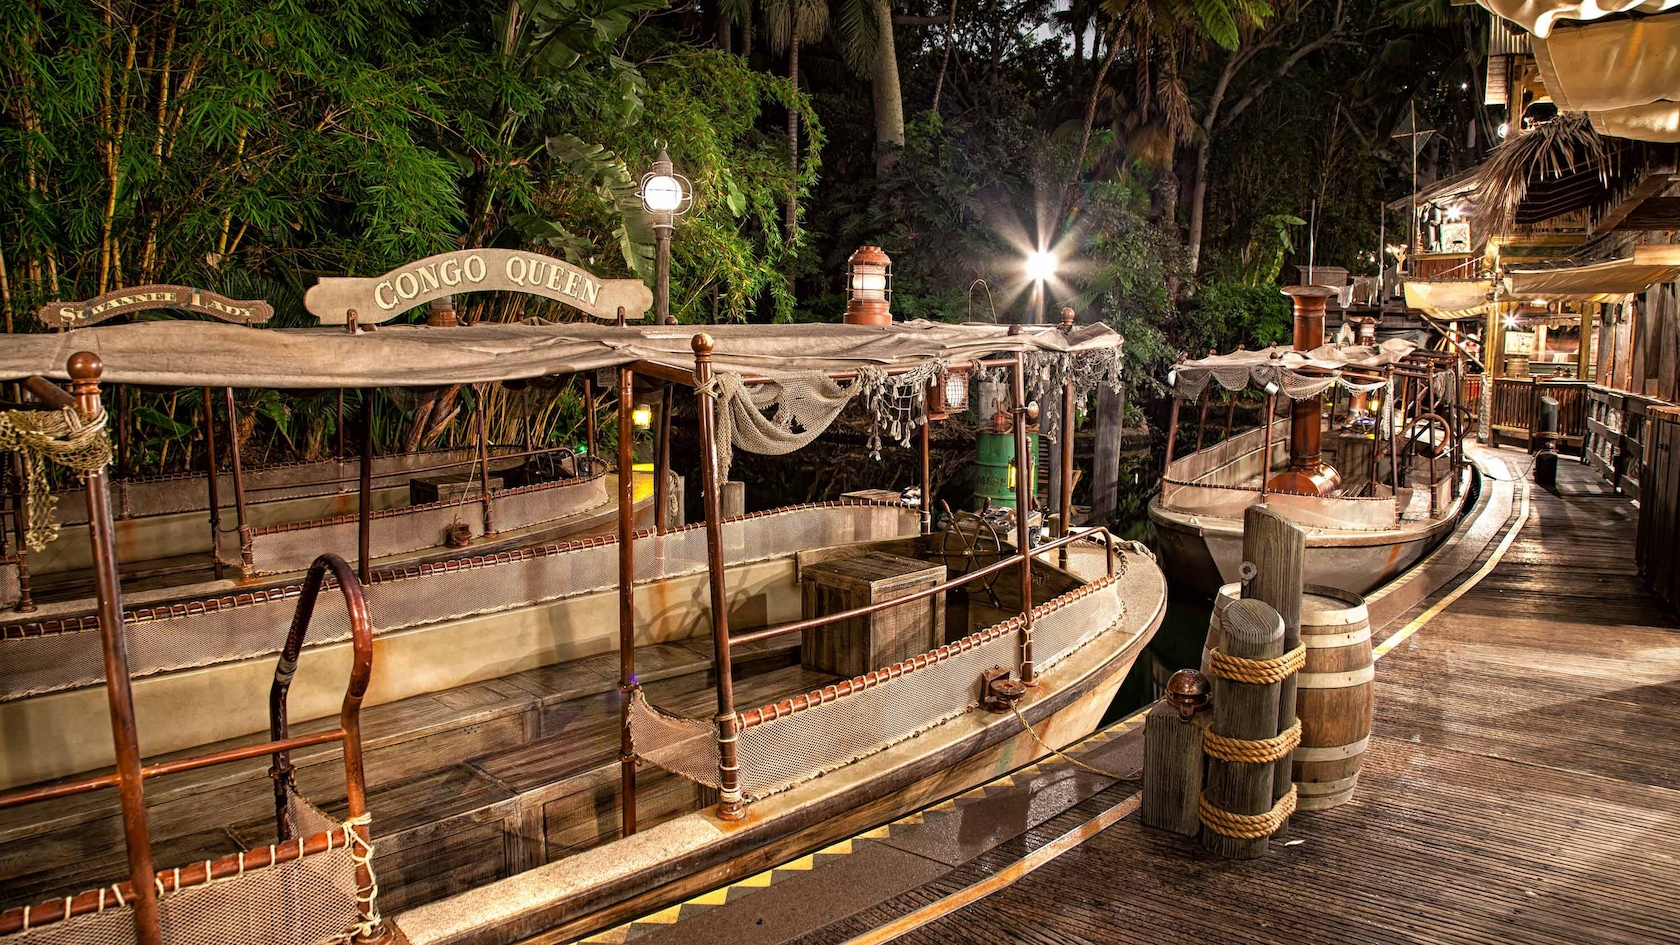 The Congo Queen, a wooden riverboat, moored to a pier with a jungle and huts